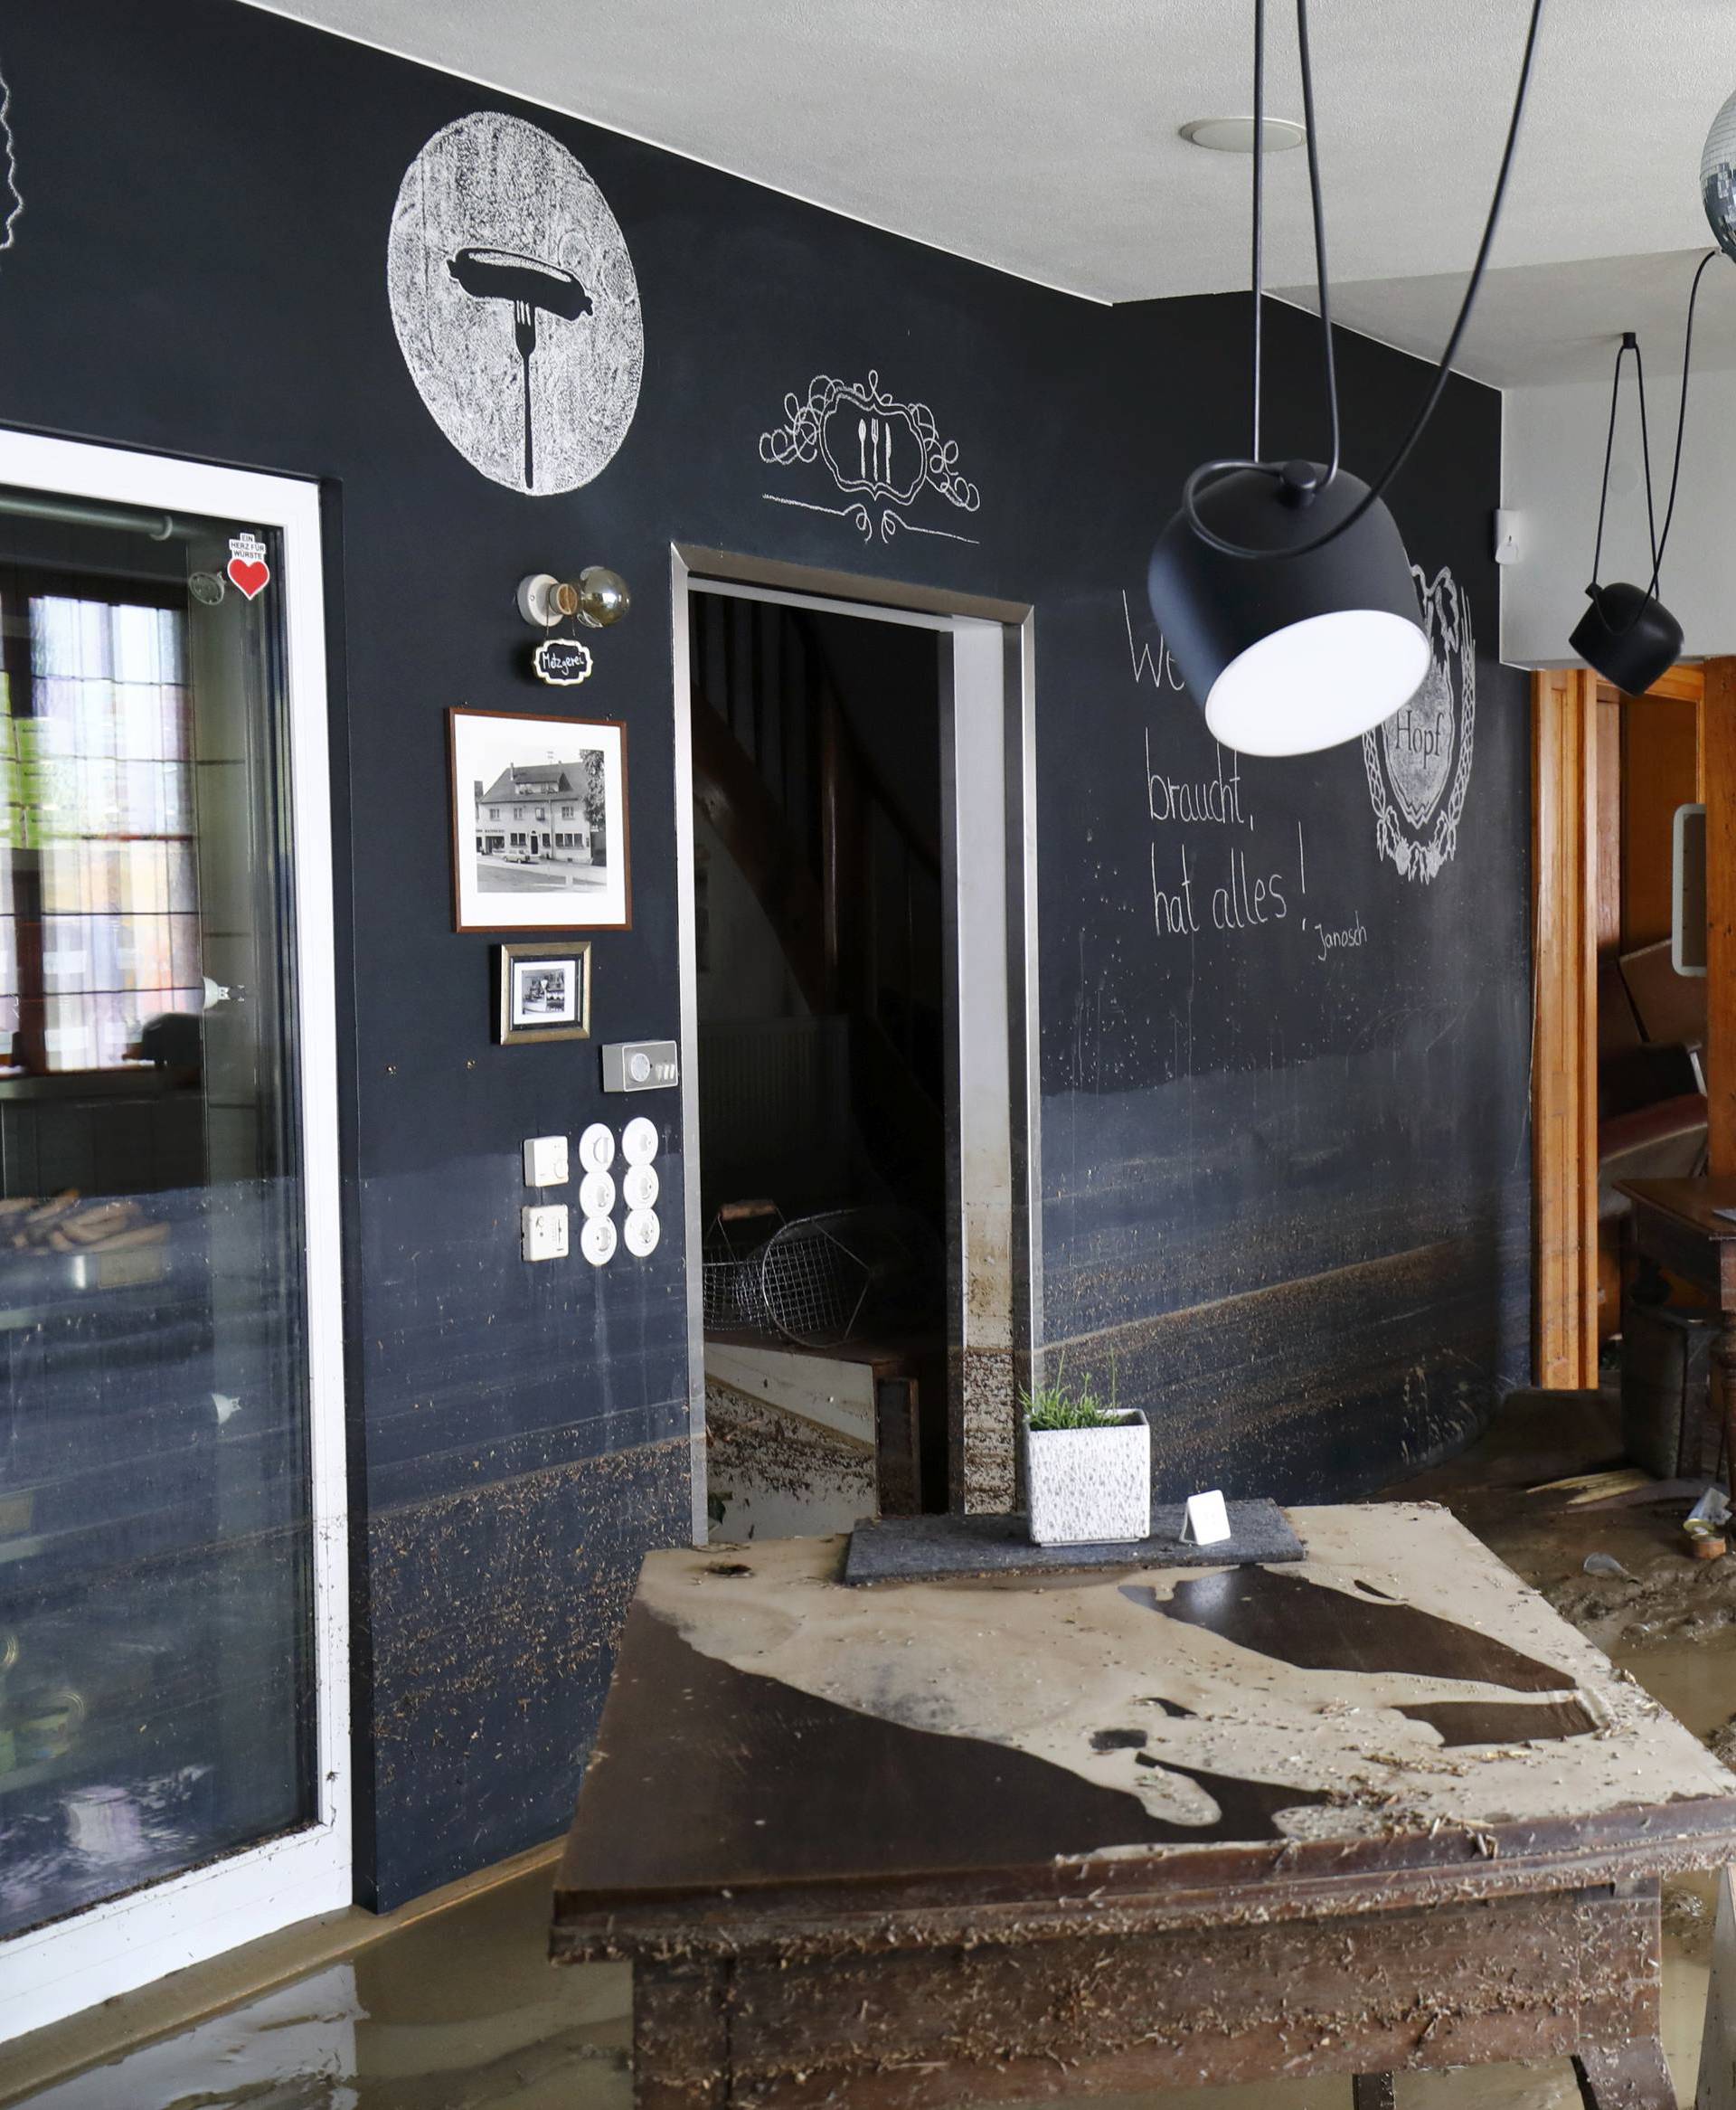 Restaurant owner Thomas Hopf stands inside his ruined location after the floods in the town of Braunsbach